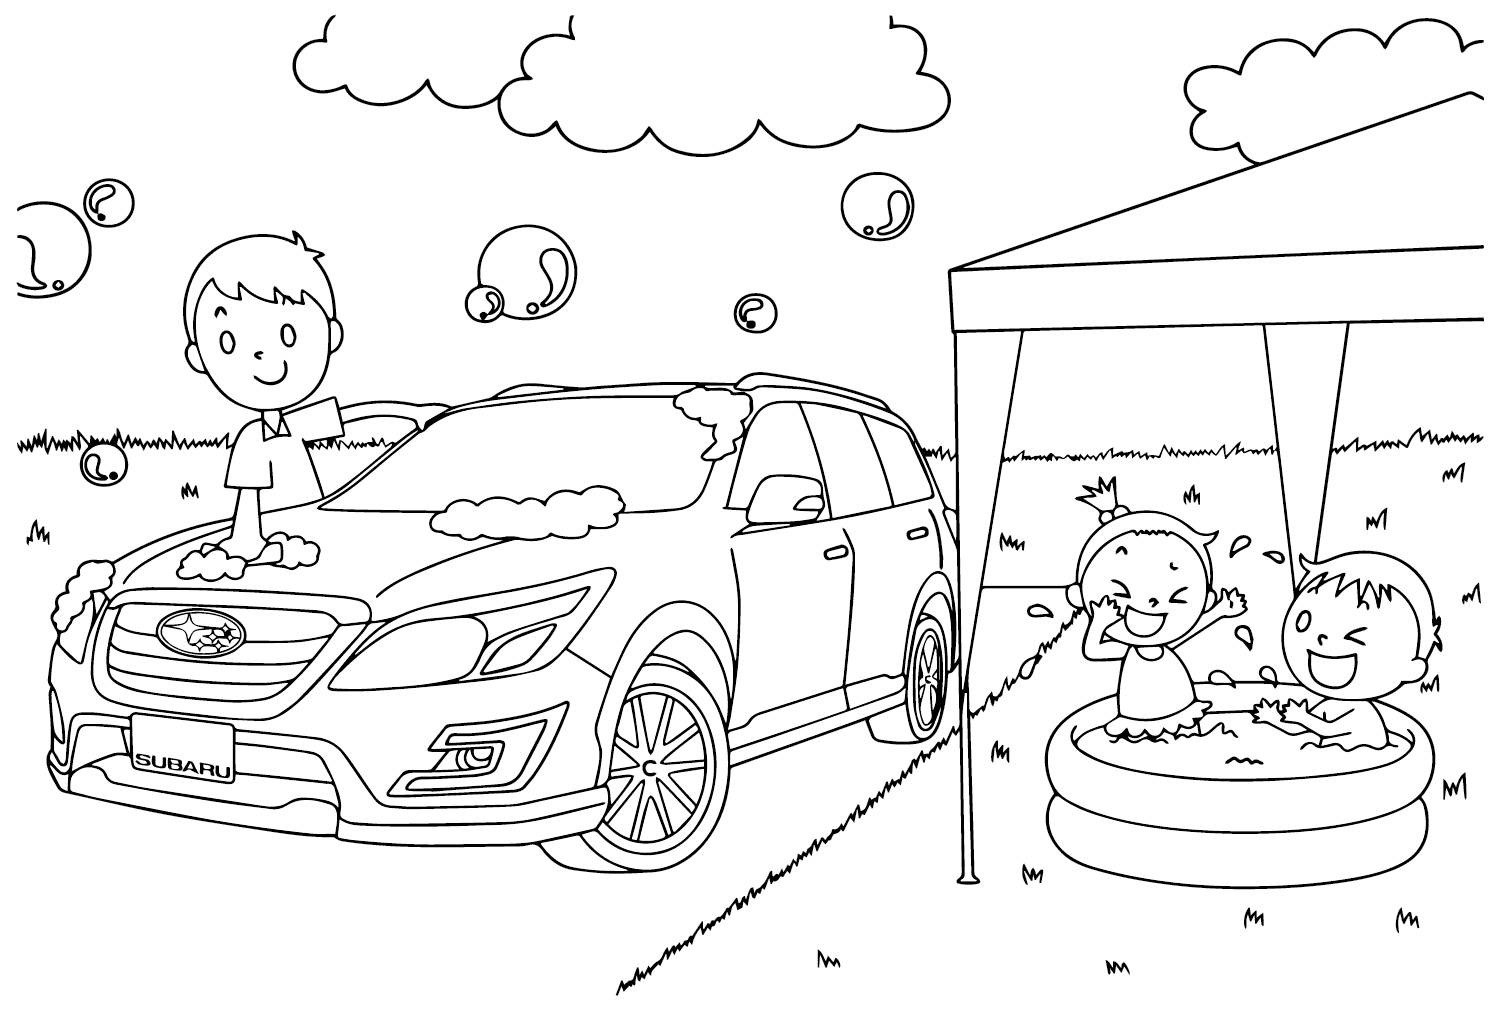 Subaru Car to Color - Free Printable Coloring Pages